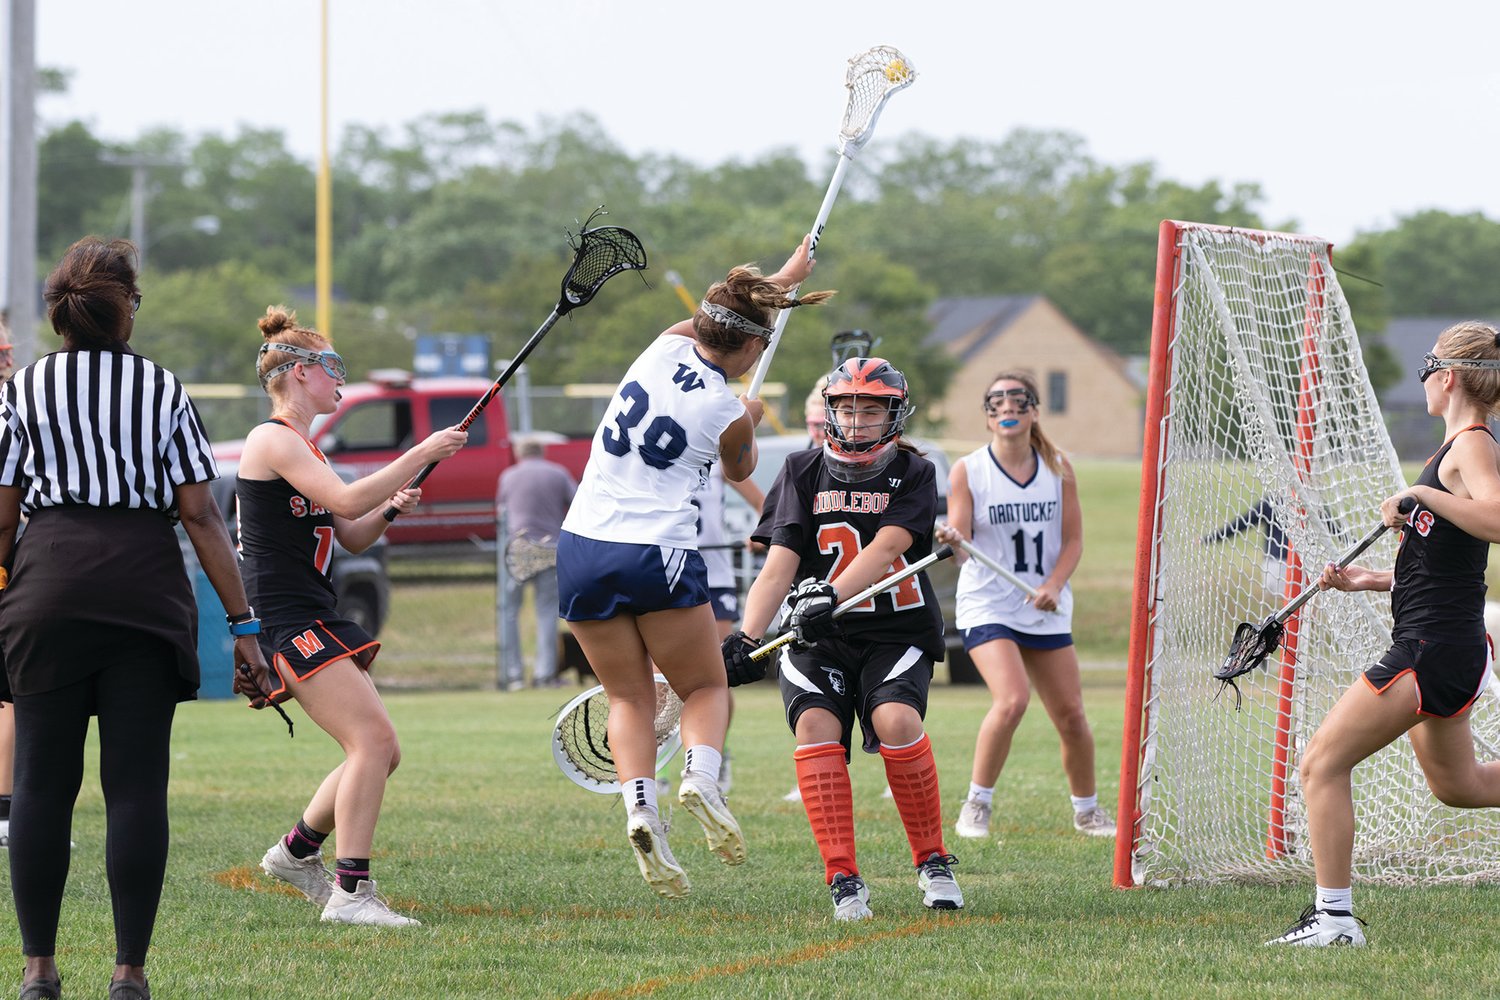 Cydney Mosscrop takes a shot on Middleboro.